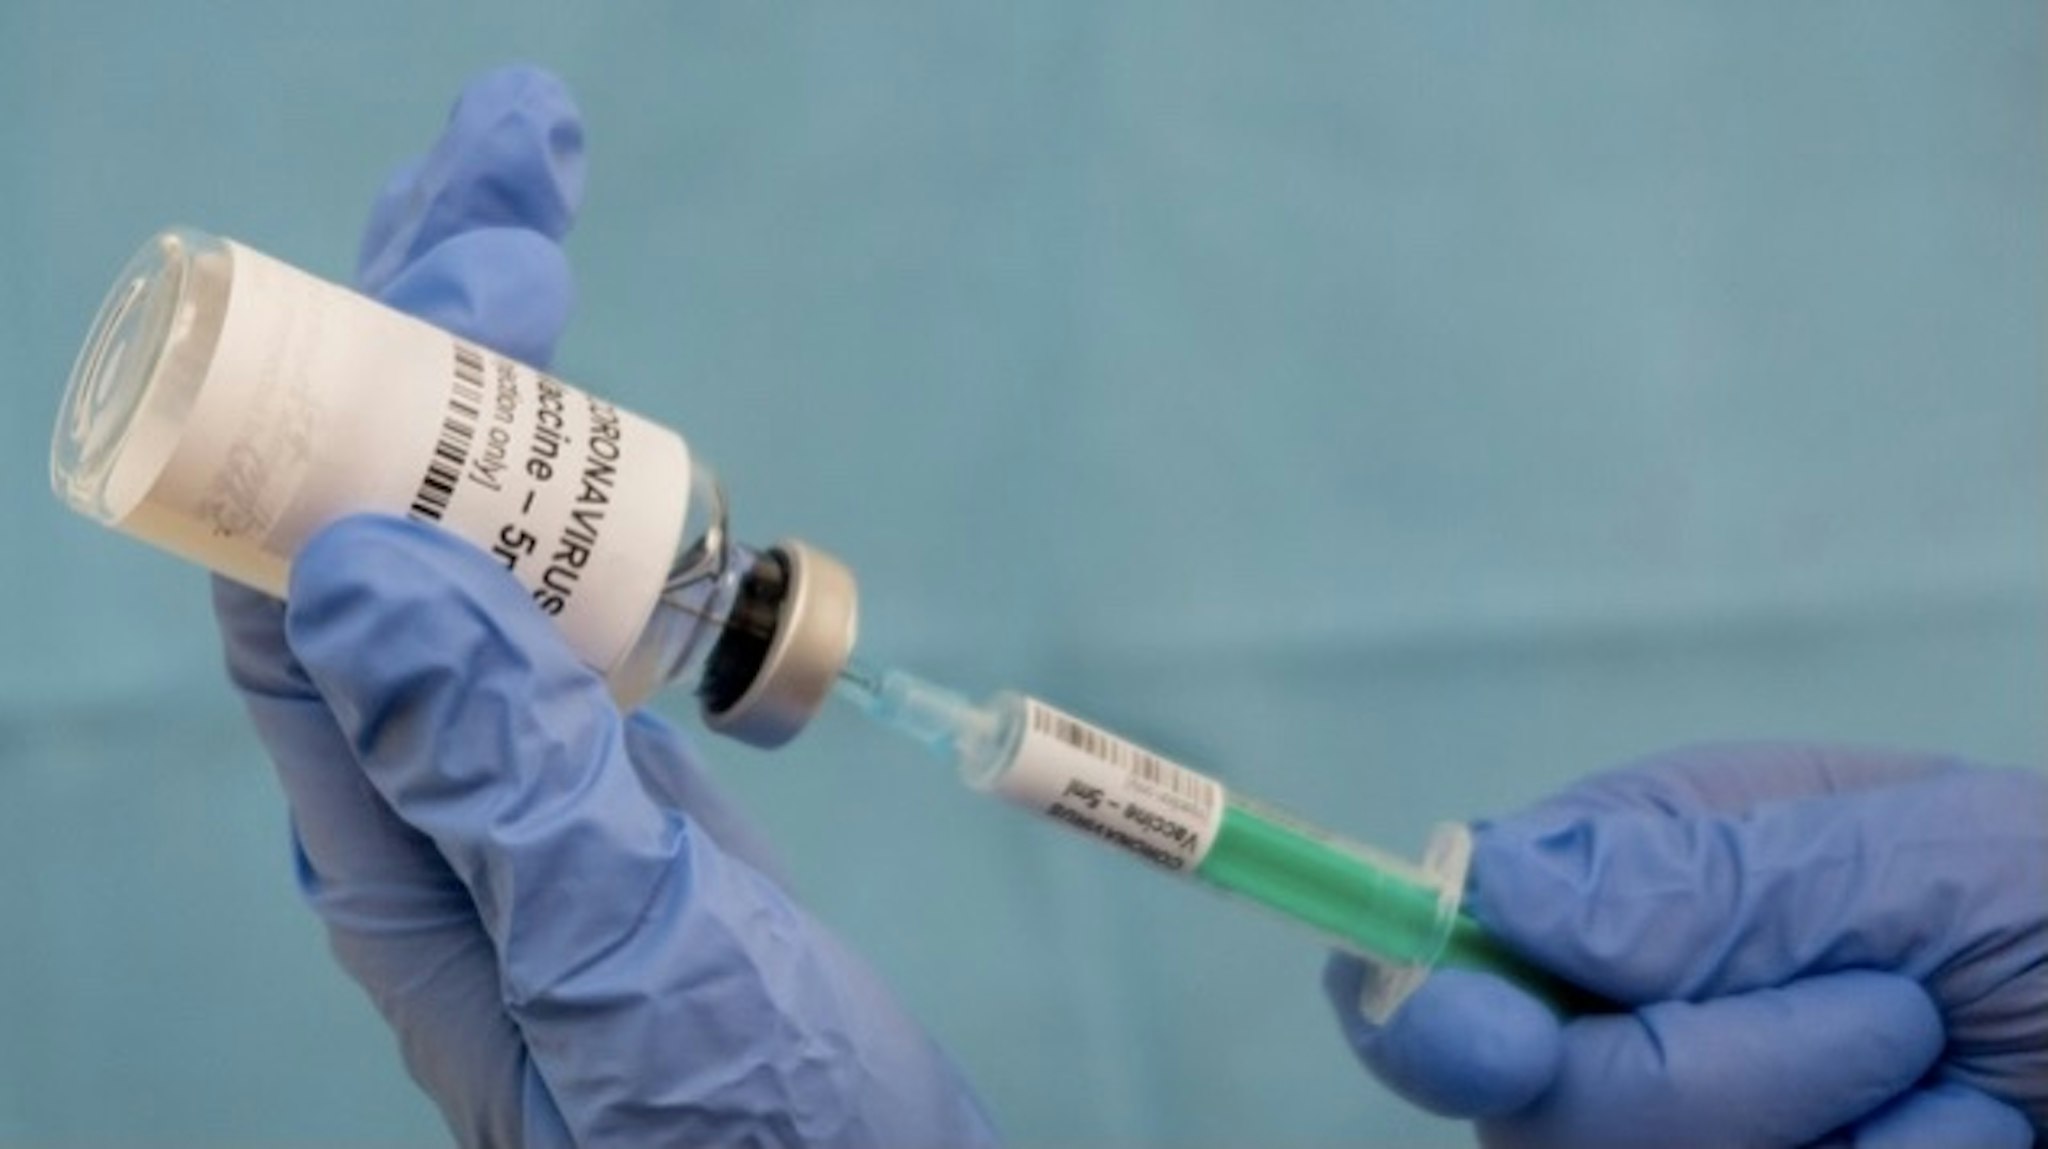 Infectious doctor fills injection syringe with CO-VID 19 vaccine - concept, for prevention, immunization and treatment for new corona virus infection(COVID-19,novel coronavirus disease 2019) - stock photo The 2019–2020 coronavirus pandemic is an ongoing pandemic of coronavirus disease 2019 (COVID-19), caused by severe acute respiratory syndrome coronavirus 2 (SARS-CoV-2).